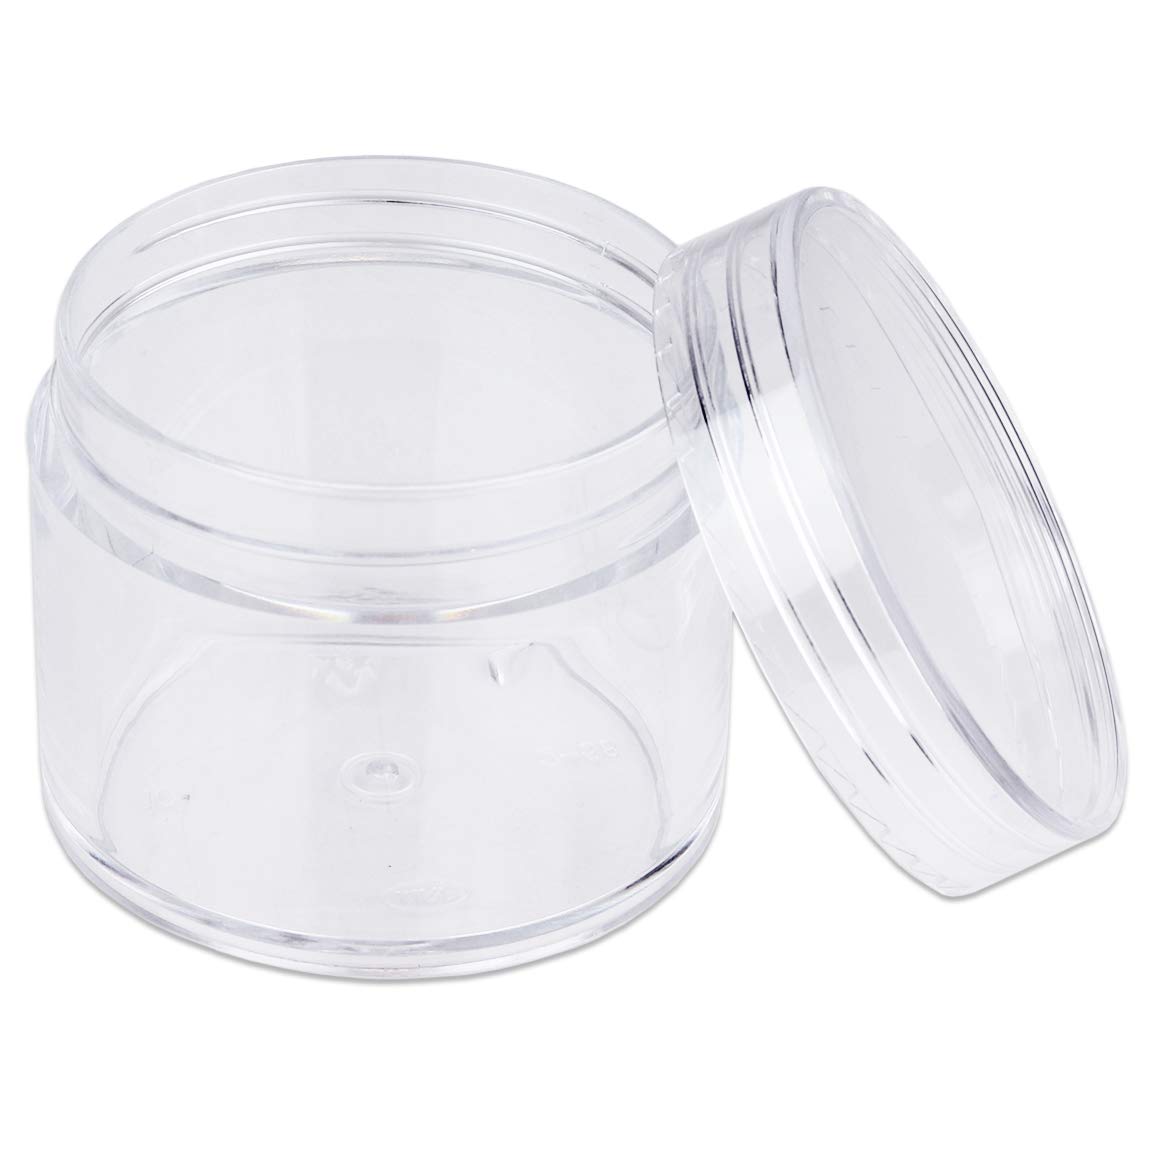 Beauticom 60 Grams/60 ML (2 Oz) Round Clear Leak Proof Plastic Container Jars with Clear Lids for Travel Storage Makeup Cosmetic Lotion Scrubs Creams Oils Salves Ointments (3 Jars)